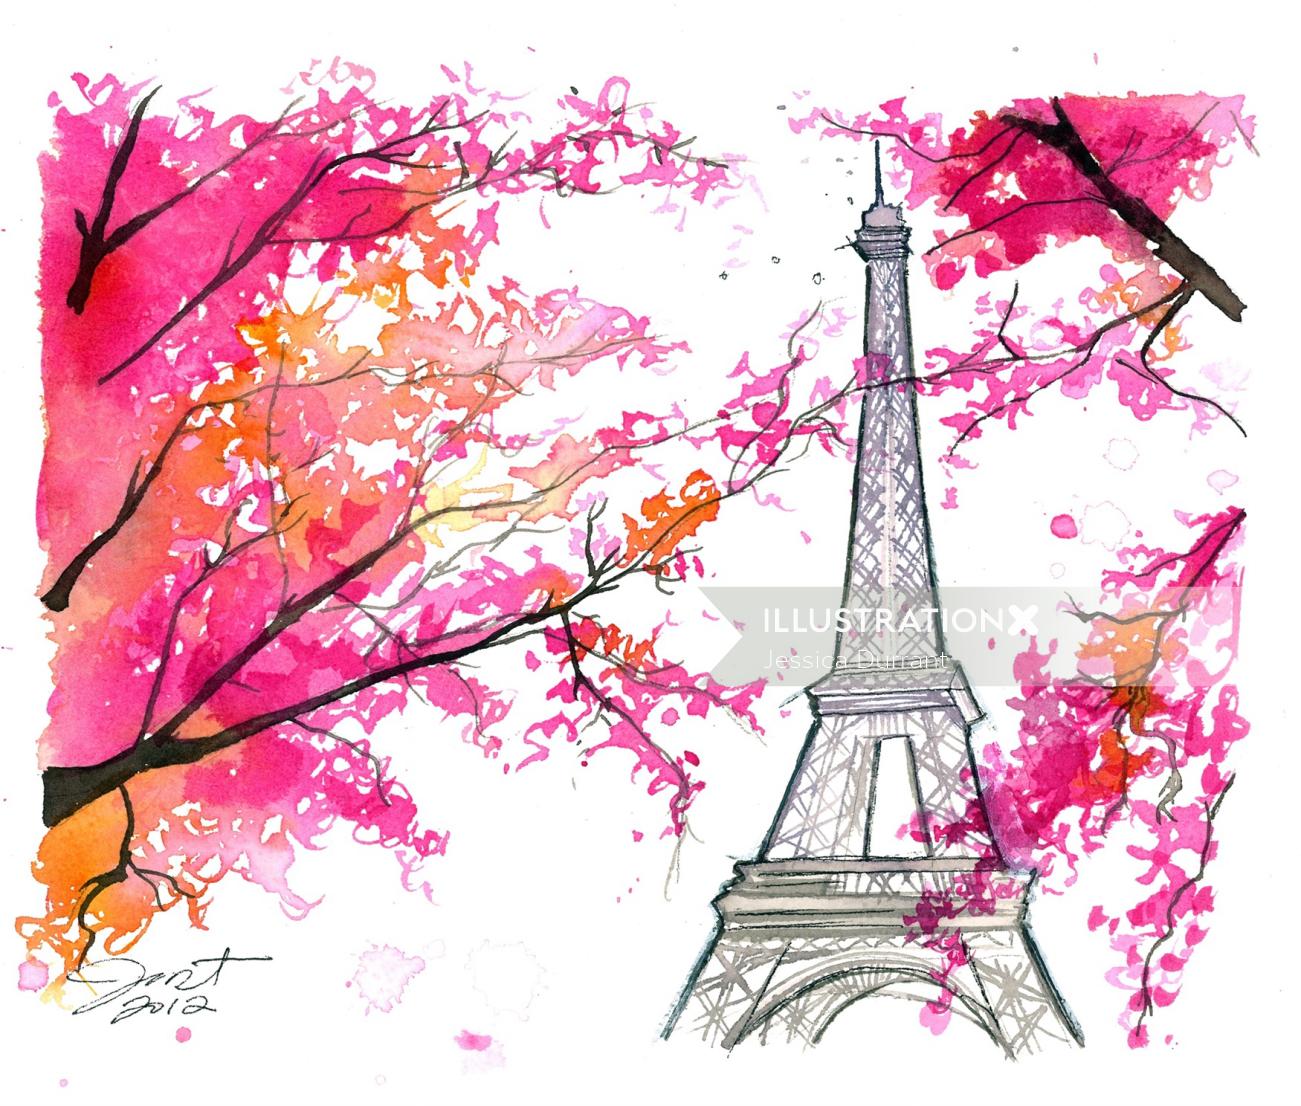 Floral painting of Eiffel Tower